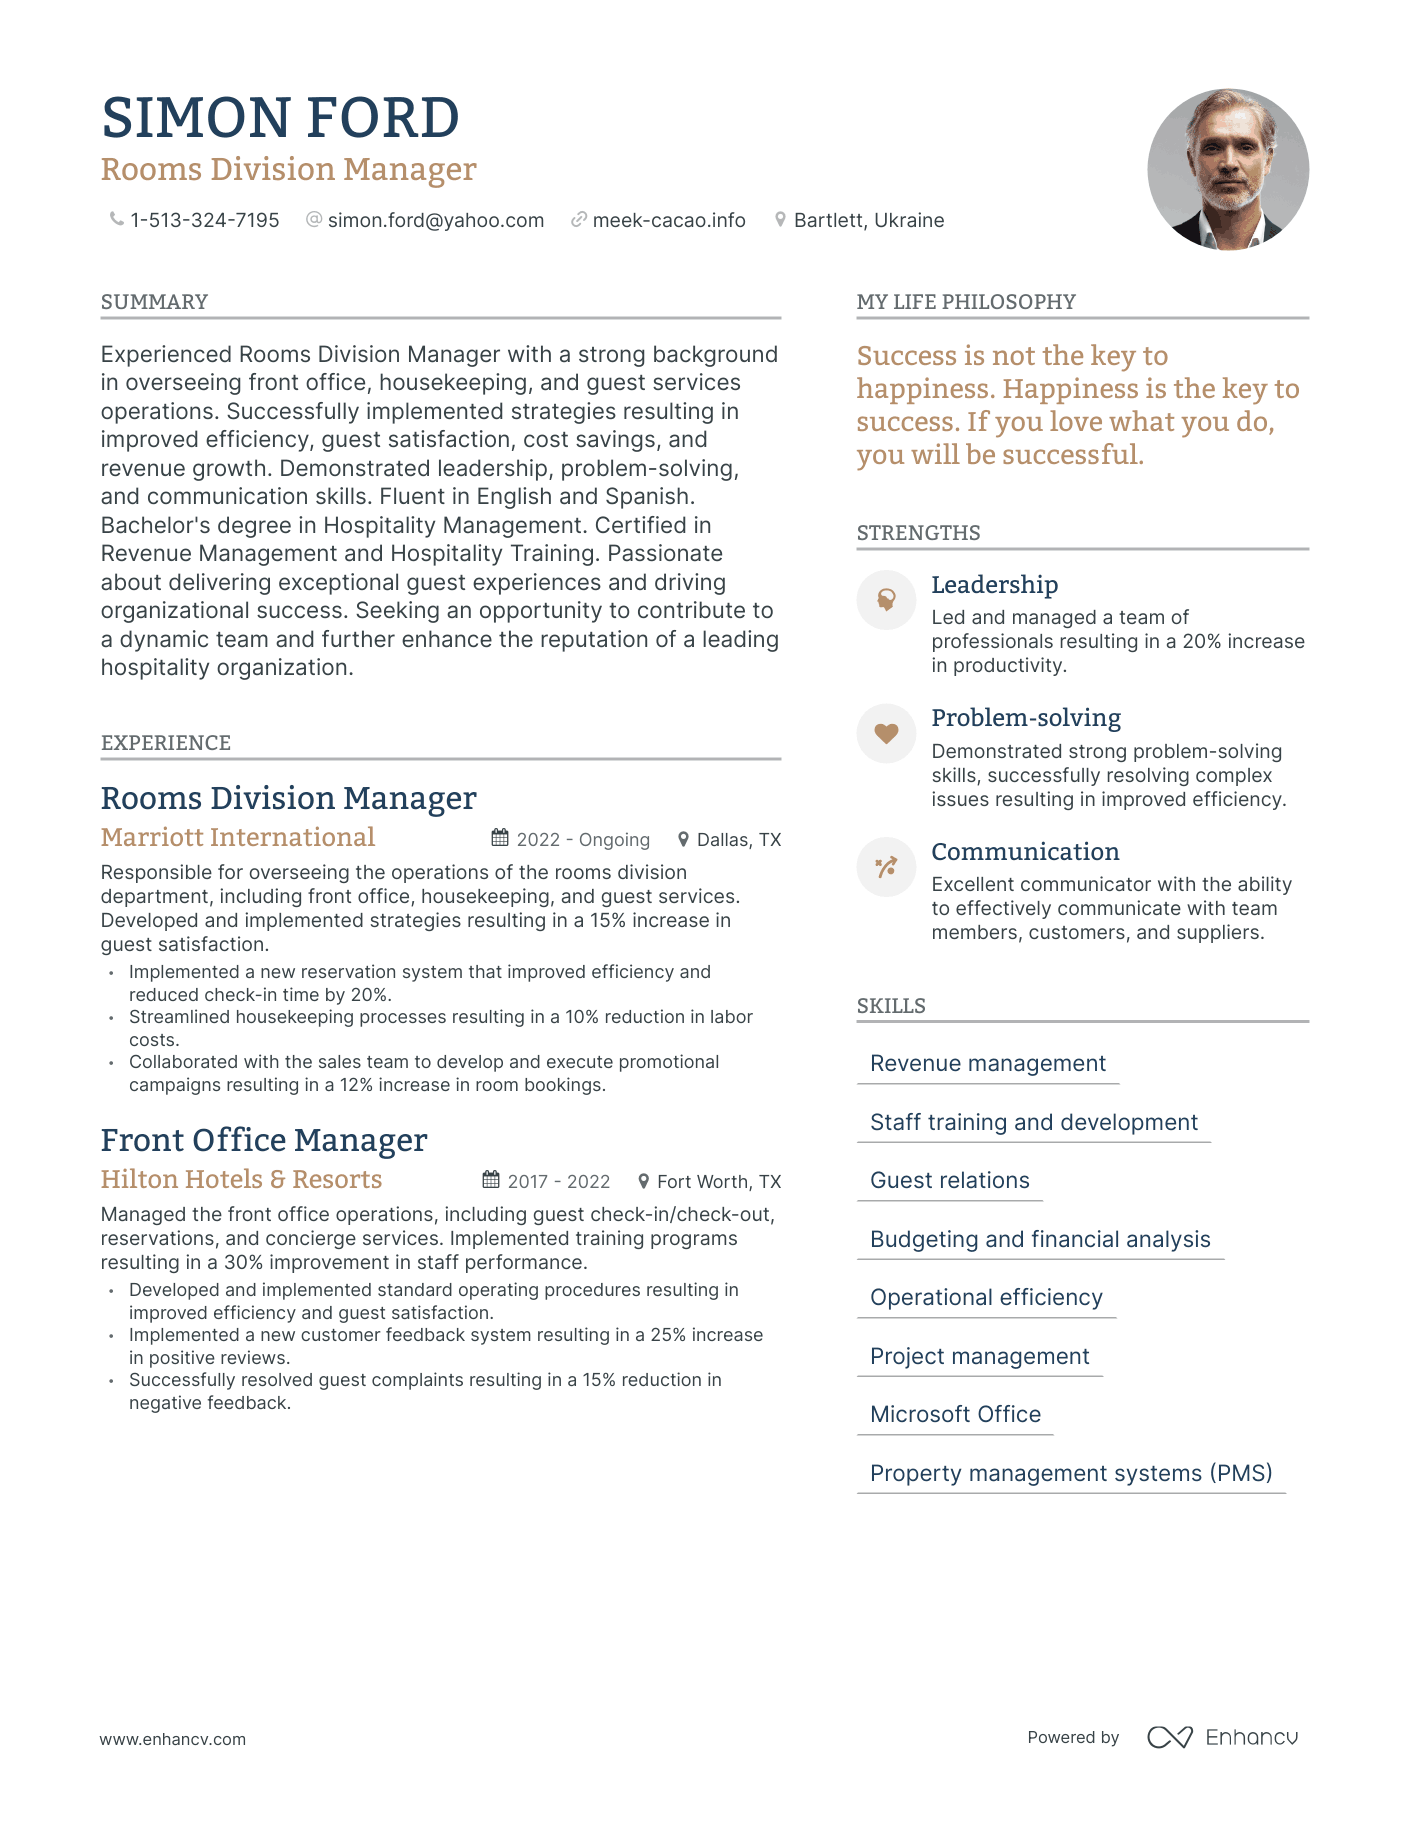 Rooms Division Manager resume example